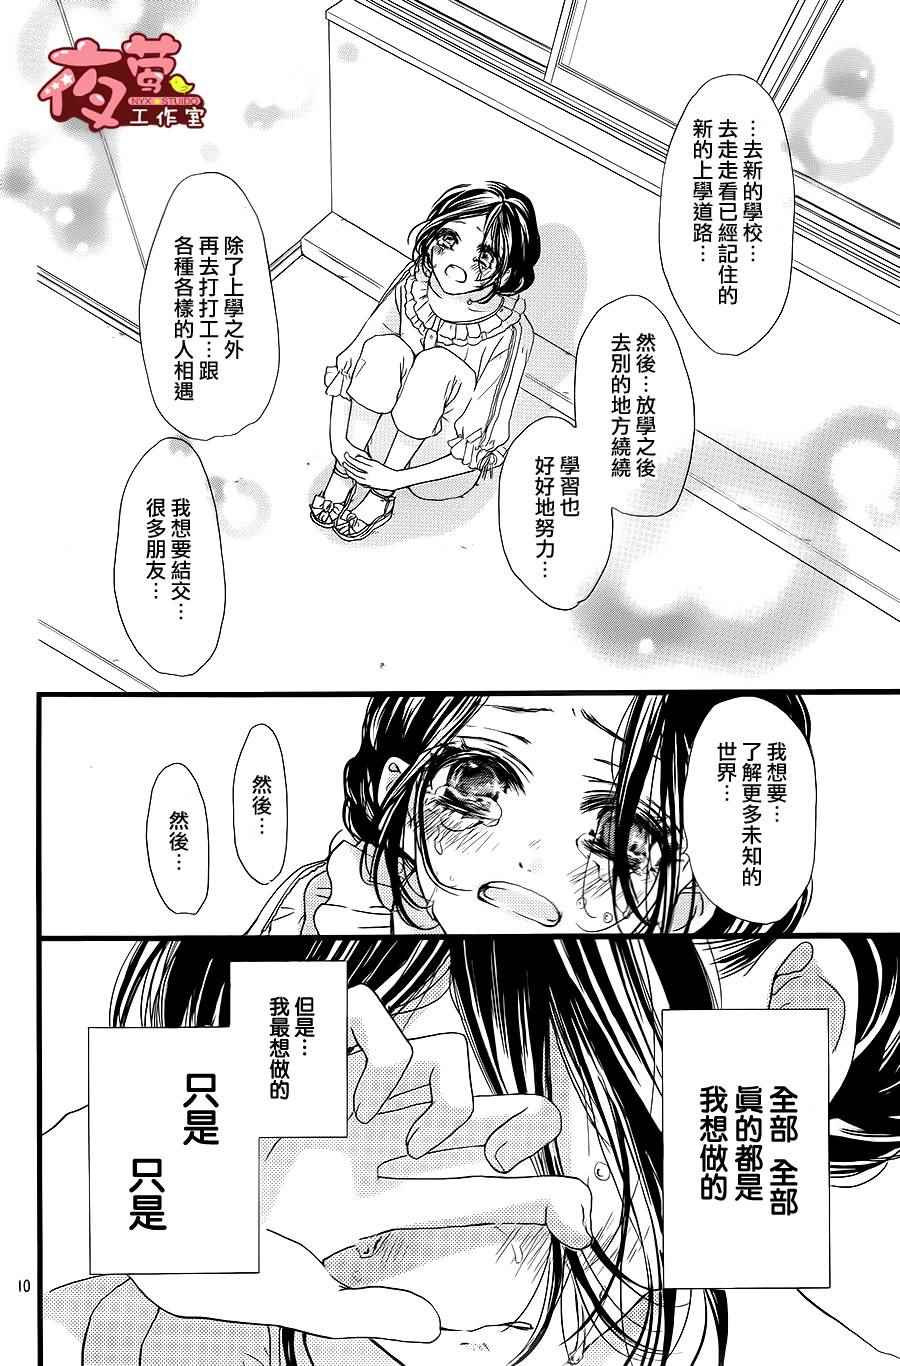 I love you baby - 第26話 - 4